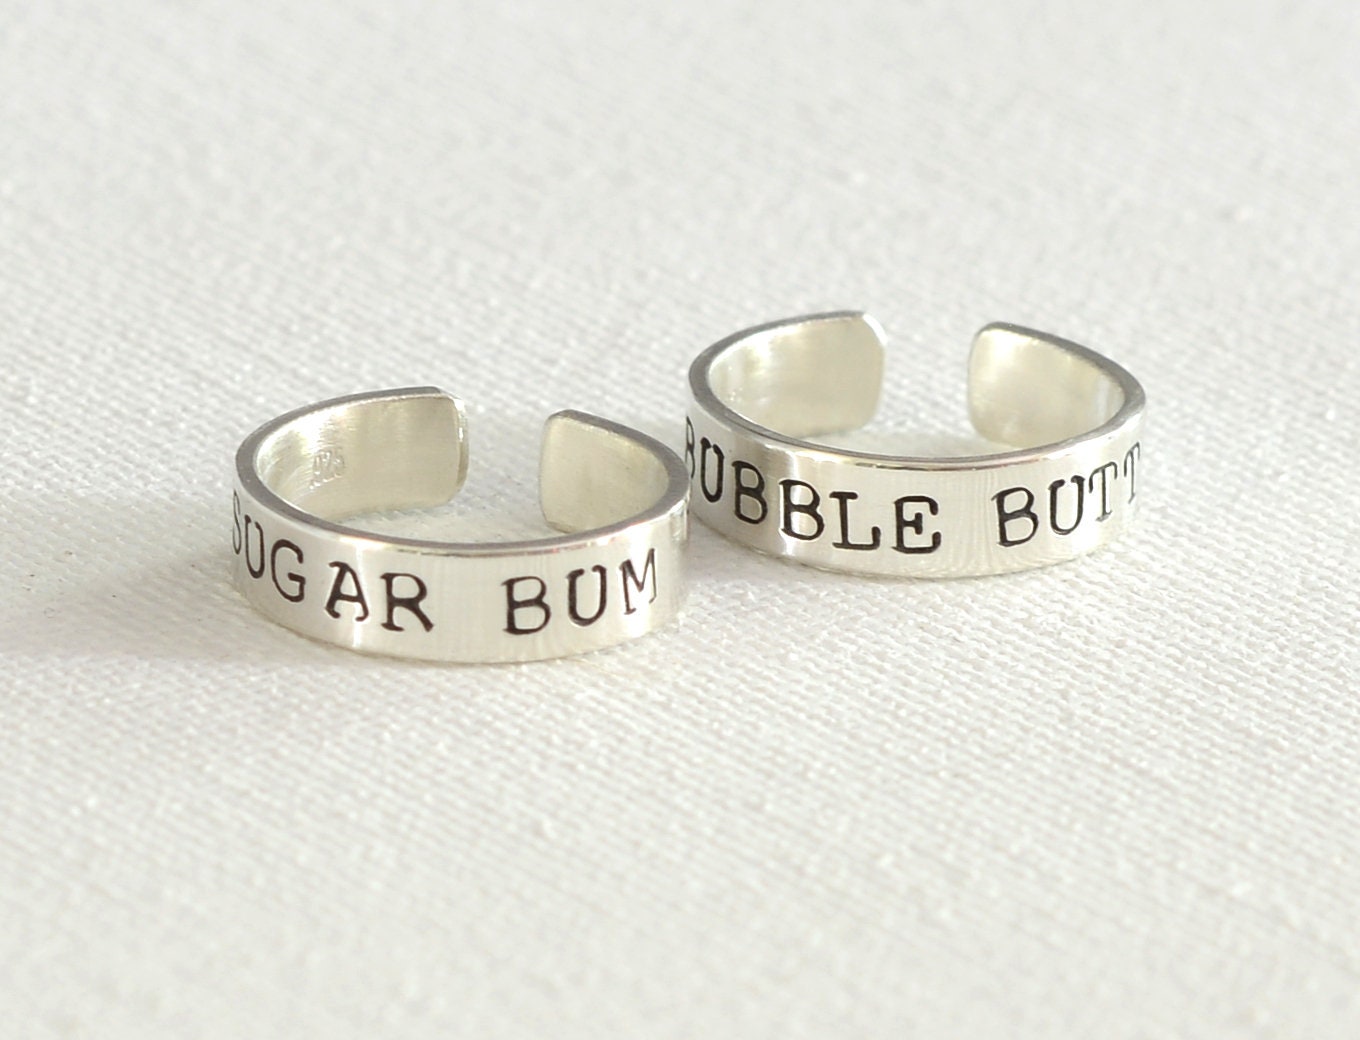 Bubble Butt and Sugar Bum Sterling Silver Toe Ring Set